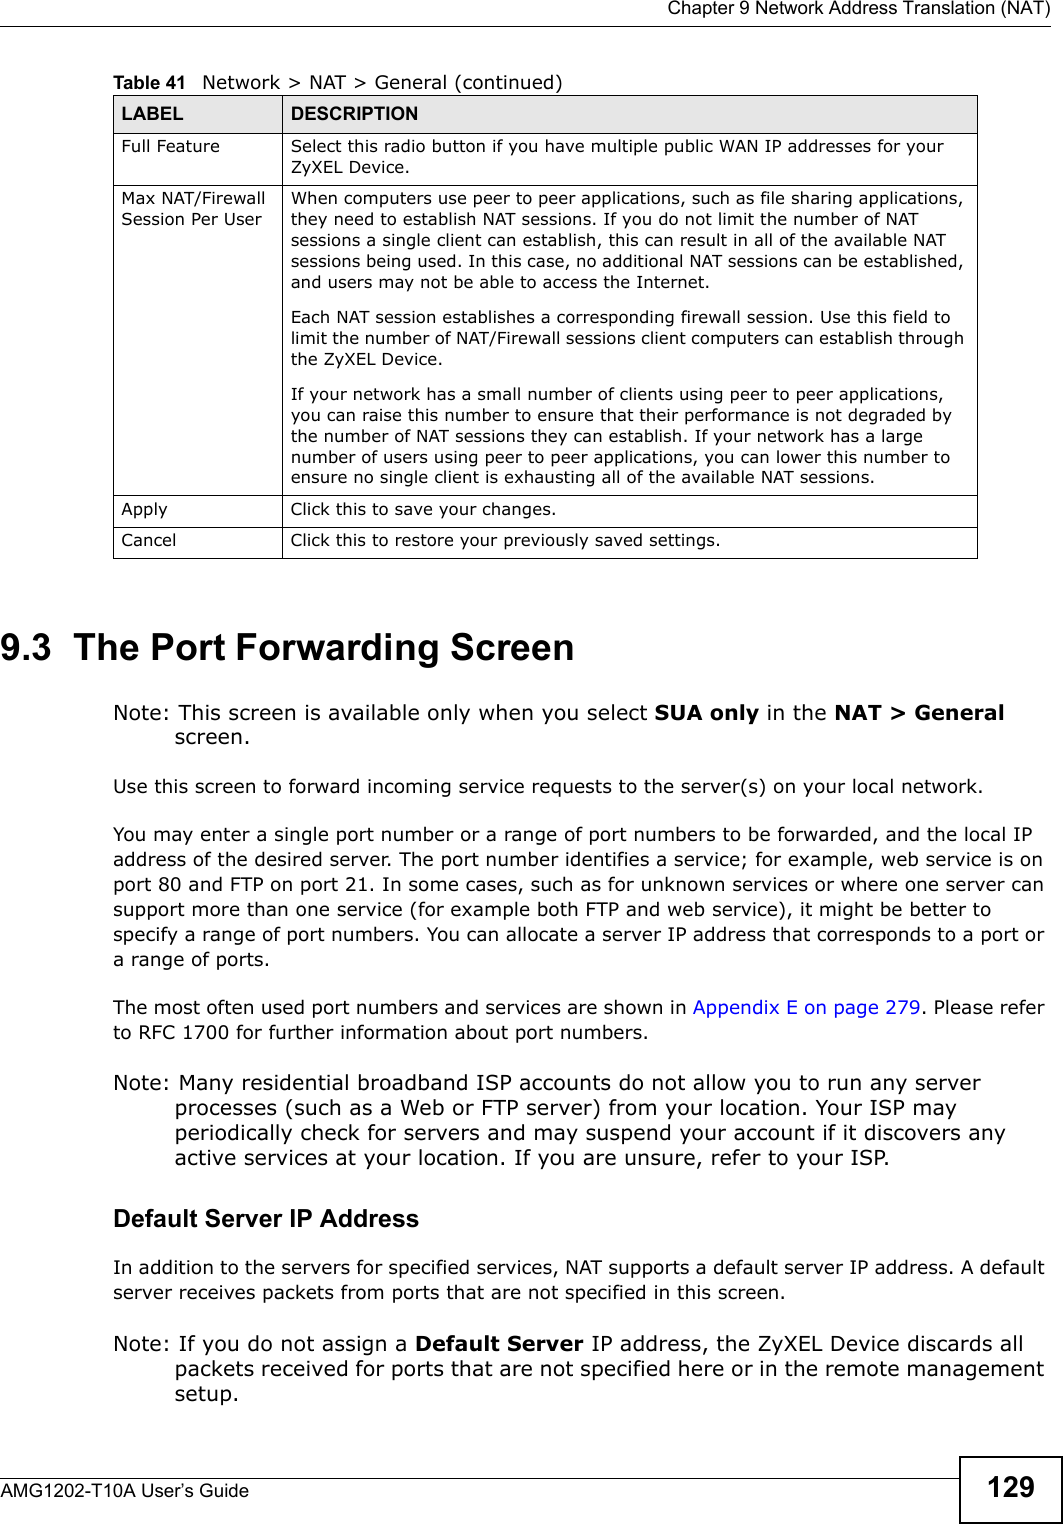  Chapter 9 Network Address Translation (NAT)AMG1202-T10A User’s Guide 1299.3  The Port Forwarding ScreenNote: This screen is available only when you select SUA only in the NAT &gt; General screen.Use this screen to forward incoming service requests to the server(s) on your local network.You may enter a single port number or a range of port numbers to be forwarded, and the local IP address of the desired server. The port number identifies a service; for example, web service is on port 80 and FTP on port 21. In some cases, such as for unknown services or where one server can support more than one service (for example both FTP and web service), it might be better to specify a range of port numbers. You can allocate a server IP address that corresponds to a port or a range of ports.The most often used port numbers and services are shown in Appendix E on page 279. Please refer to RFC 1700 for further information about port numbers. Note: Many residential broadband ISP accounts do not allow you to run any server processes (such as a Web or FTP server) from your location. Your ISP may periodically check for servers and may suspend your account if it discovers any active services at your location. If you are unsure, refer to your ISP.Default Server IP AddressIn addition to the servers for specified services, NAT supports a default server IP address. A default server receives packets from ports that are not specified in this screen.Note: If you do not assign a Default Server IP address, the ZyXEL Device discards all packets received for ports that are not specified here or in the remote management setup.Full Feature  Select this radio button if you have multiple public WAN IP addresses for your ZyXEL Device.Max NAT/Firewall Session Per UserWhen computers use peer to peer applications, such as file sharing applications, they need to establish NAT sessions. If you do not limit the number of NAT sessions a single client can establish, this can result in all of the available NAT sessions being used. In this case, no additional NAT sessions can be established, and users may not be able to access the Internet.Each NAT session establishes a corresponding firewall session. Use this field to limit the number of NAT/Firewall sessions client computers can establish through the ZyXEL Device.If your network has a small number of clients using peer to peer applications, you can raise this number to ensure that their performance is not degraded by the number of NAT sessions they can establish. If your network has a large number of users using peer to peer applications, you can lower this number to ensure no single client is exhausting all of the available NAT sessions.Apply Click this to save your changes.Cancel Click this to restore your previously saved settings.Table 41   Network &gt; NAT &gt; General (continued)LABEL DESCRIPTION